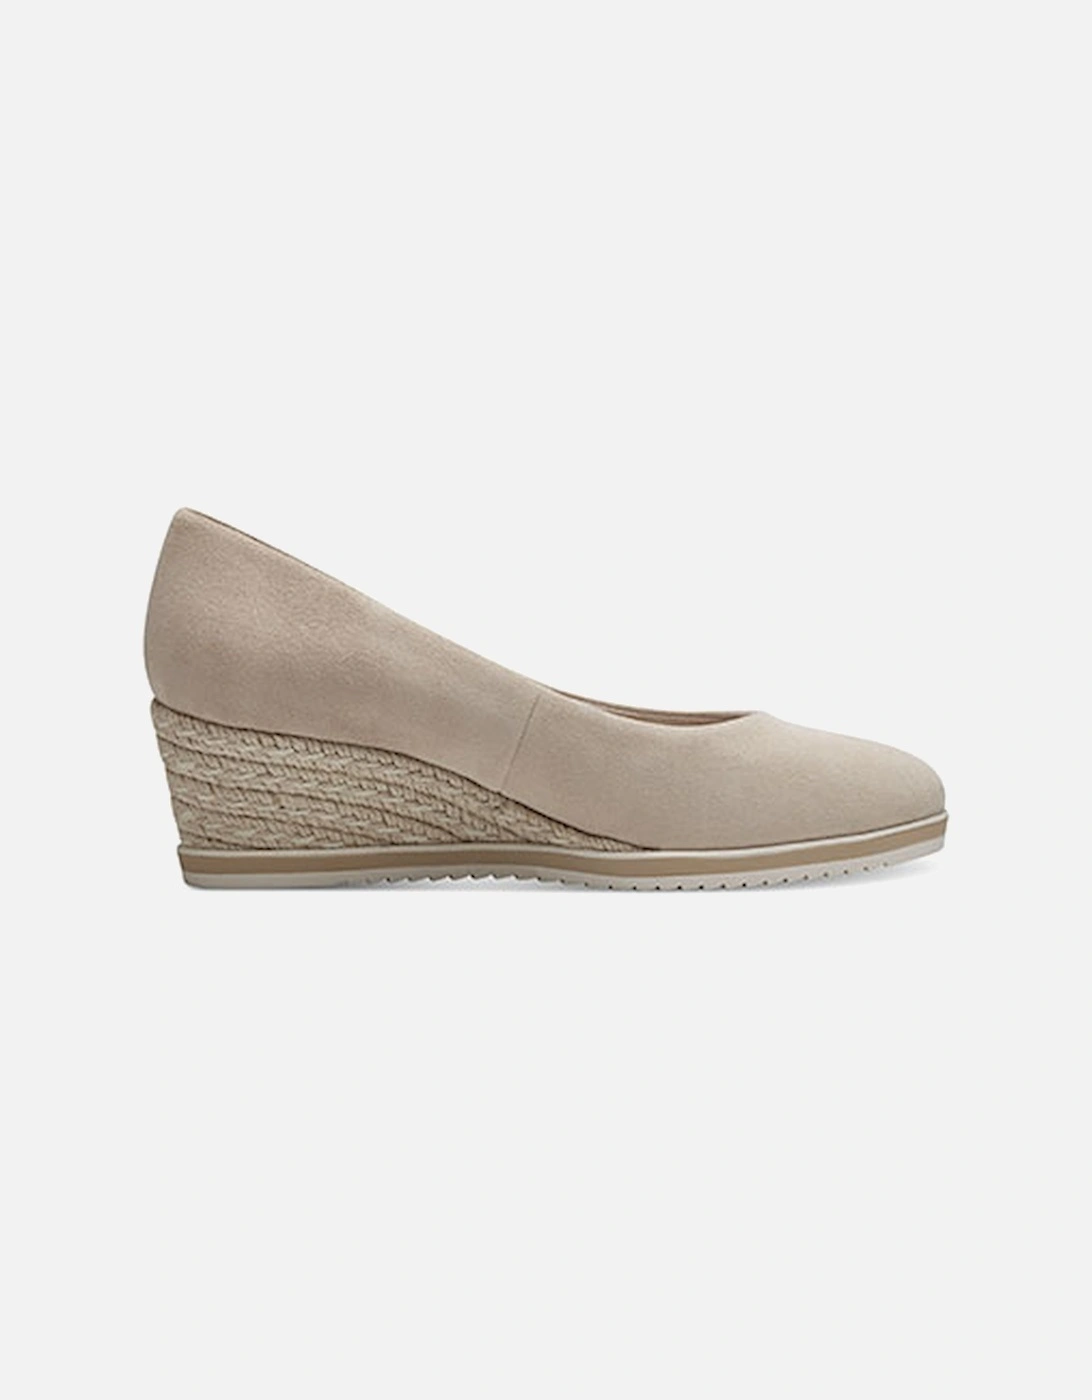 Womens Leather Wedge Nude